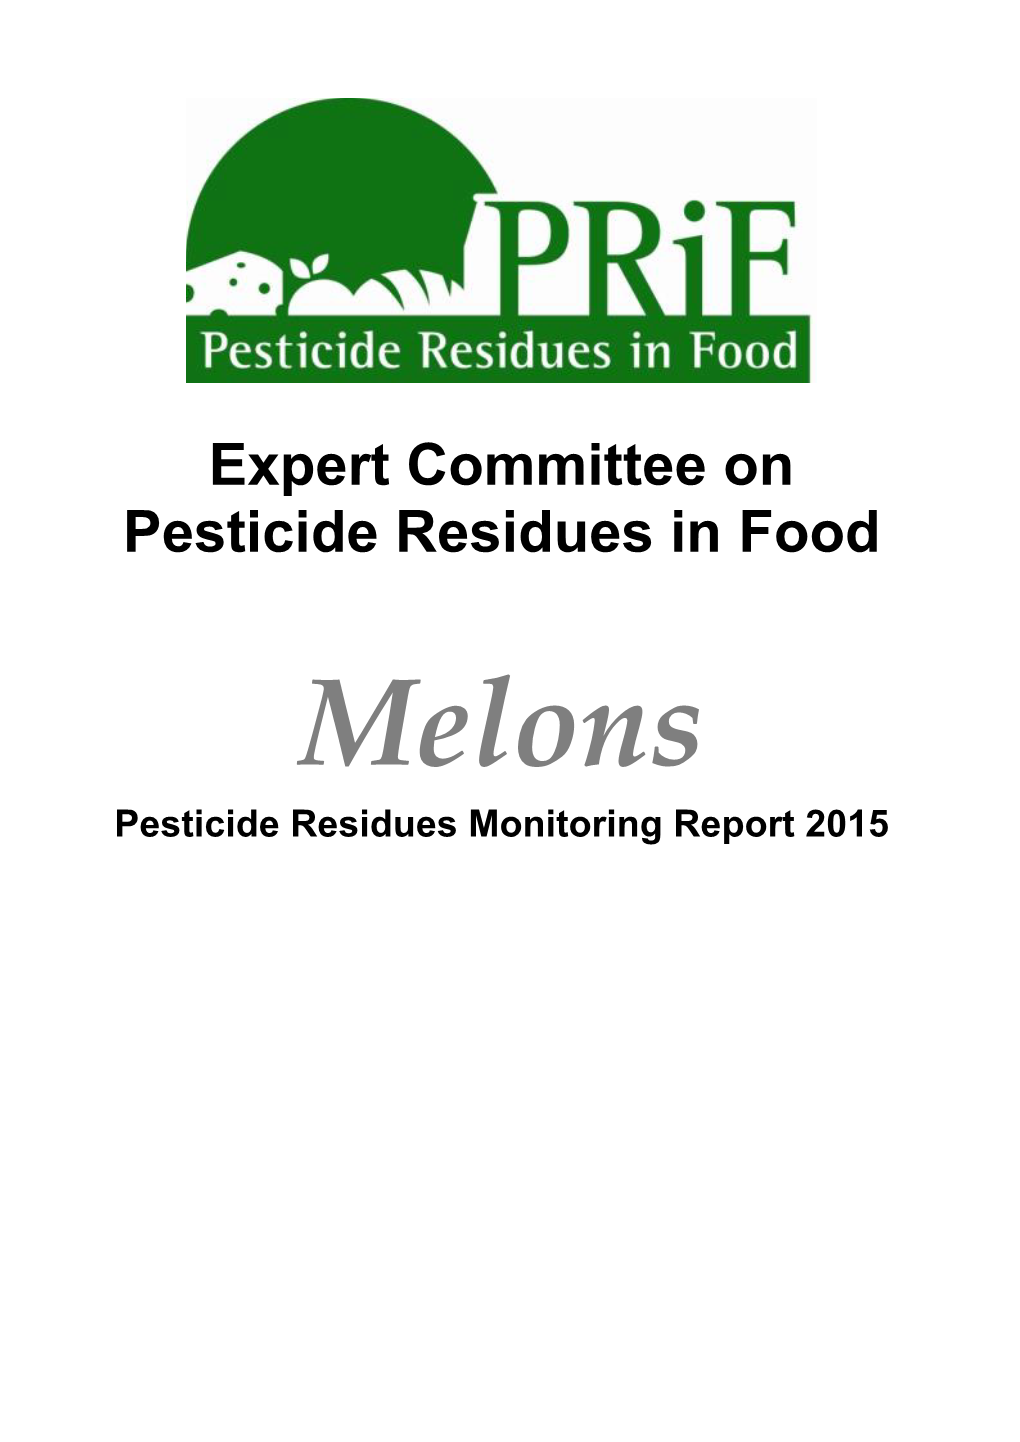 Melons Pesticide Residues Monitoring Report 2015